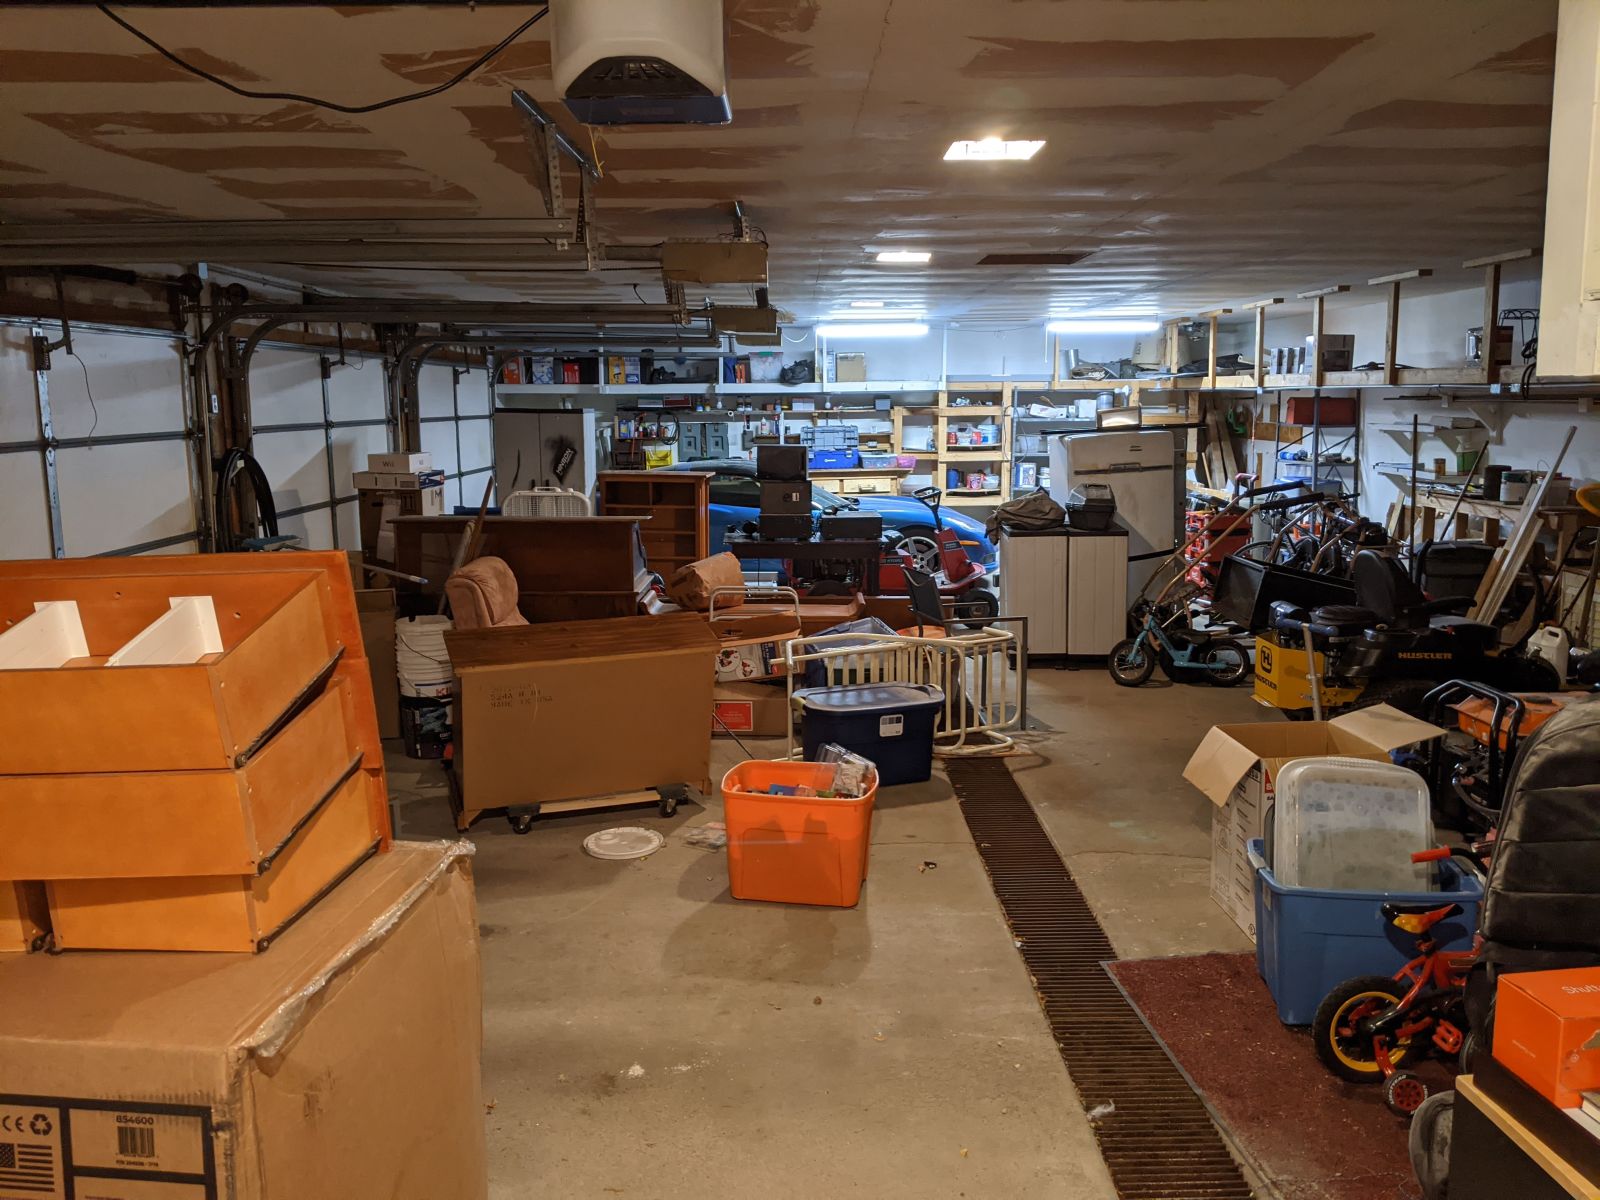 Garage full of crap, blue car in the distance